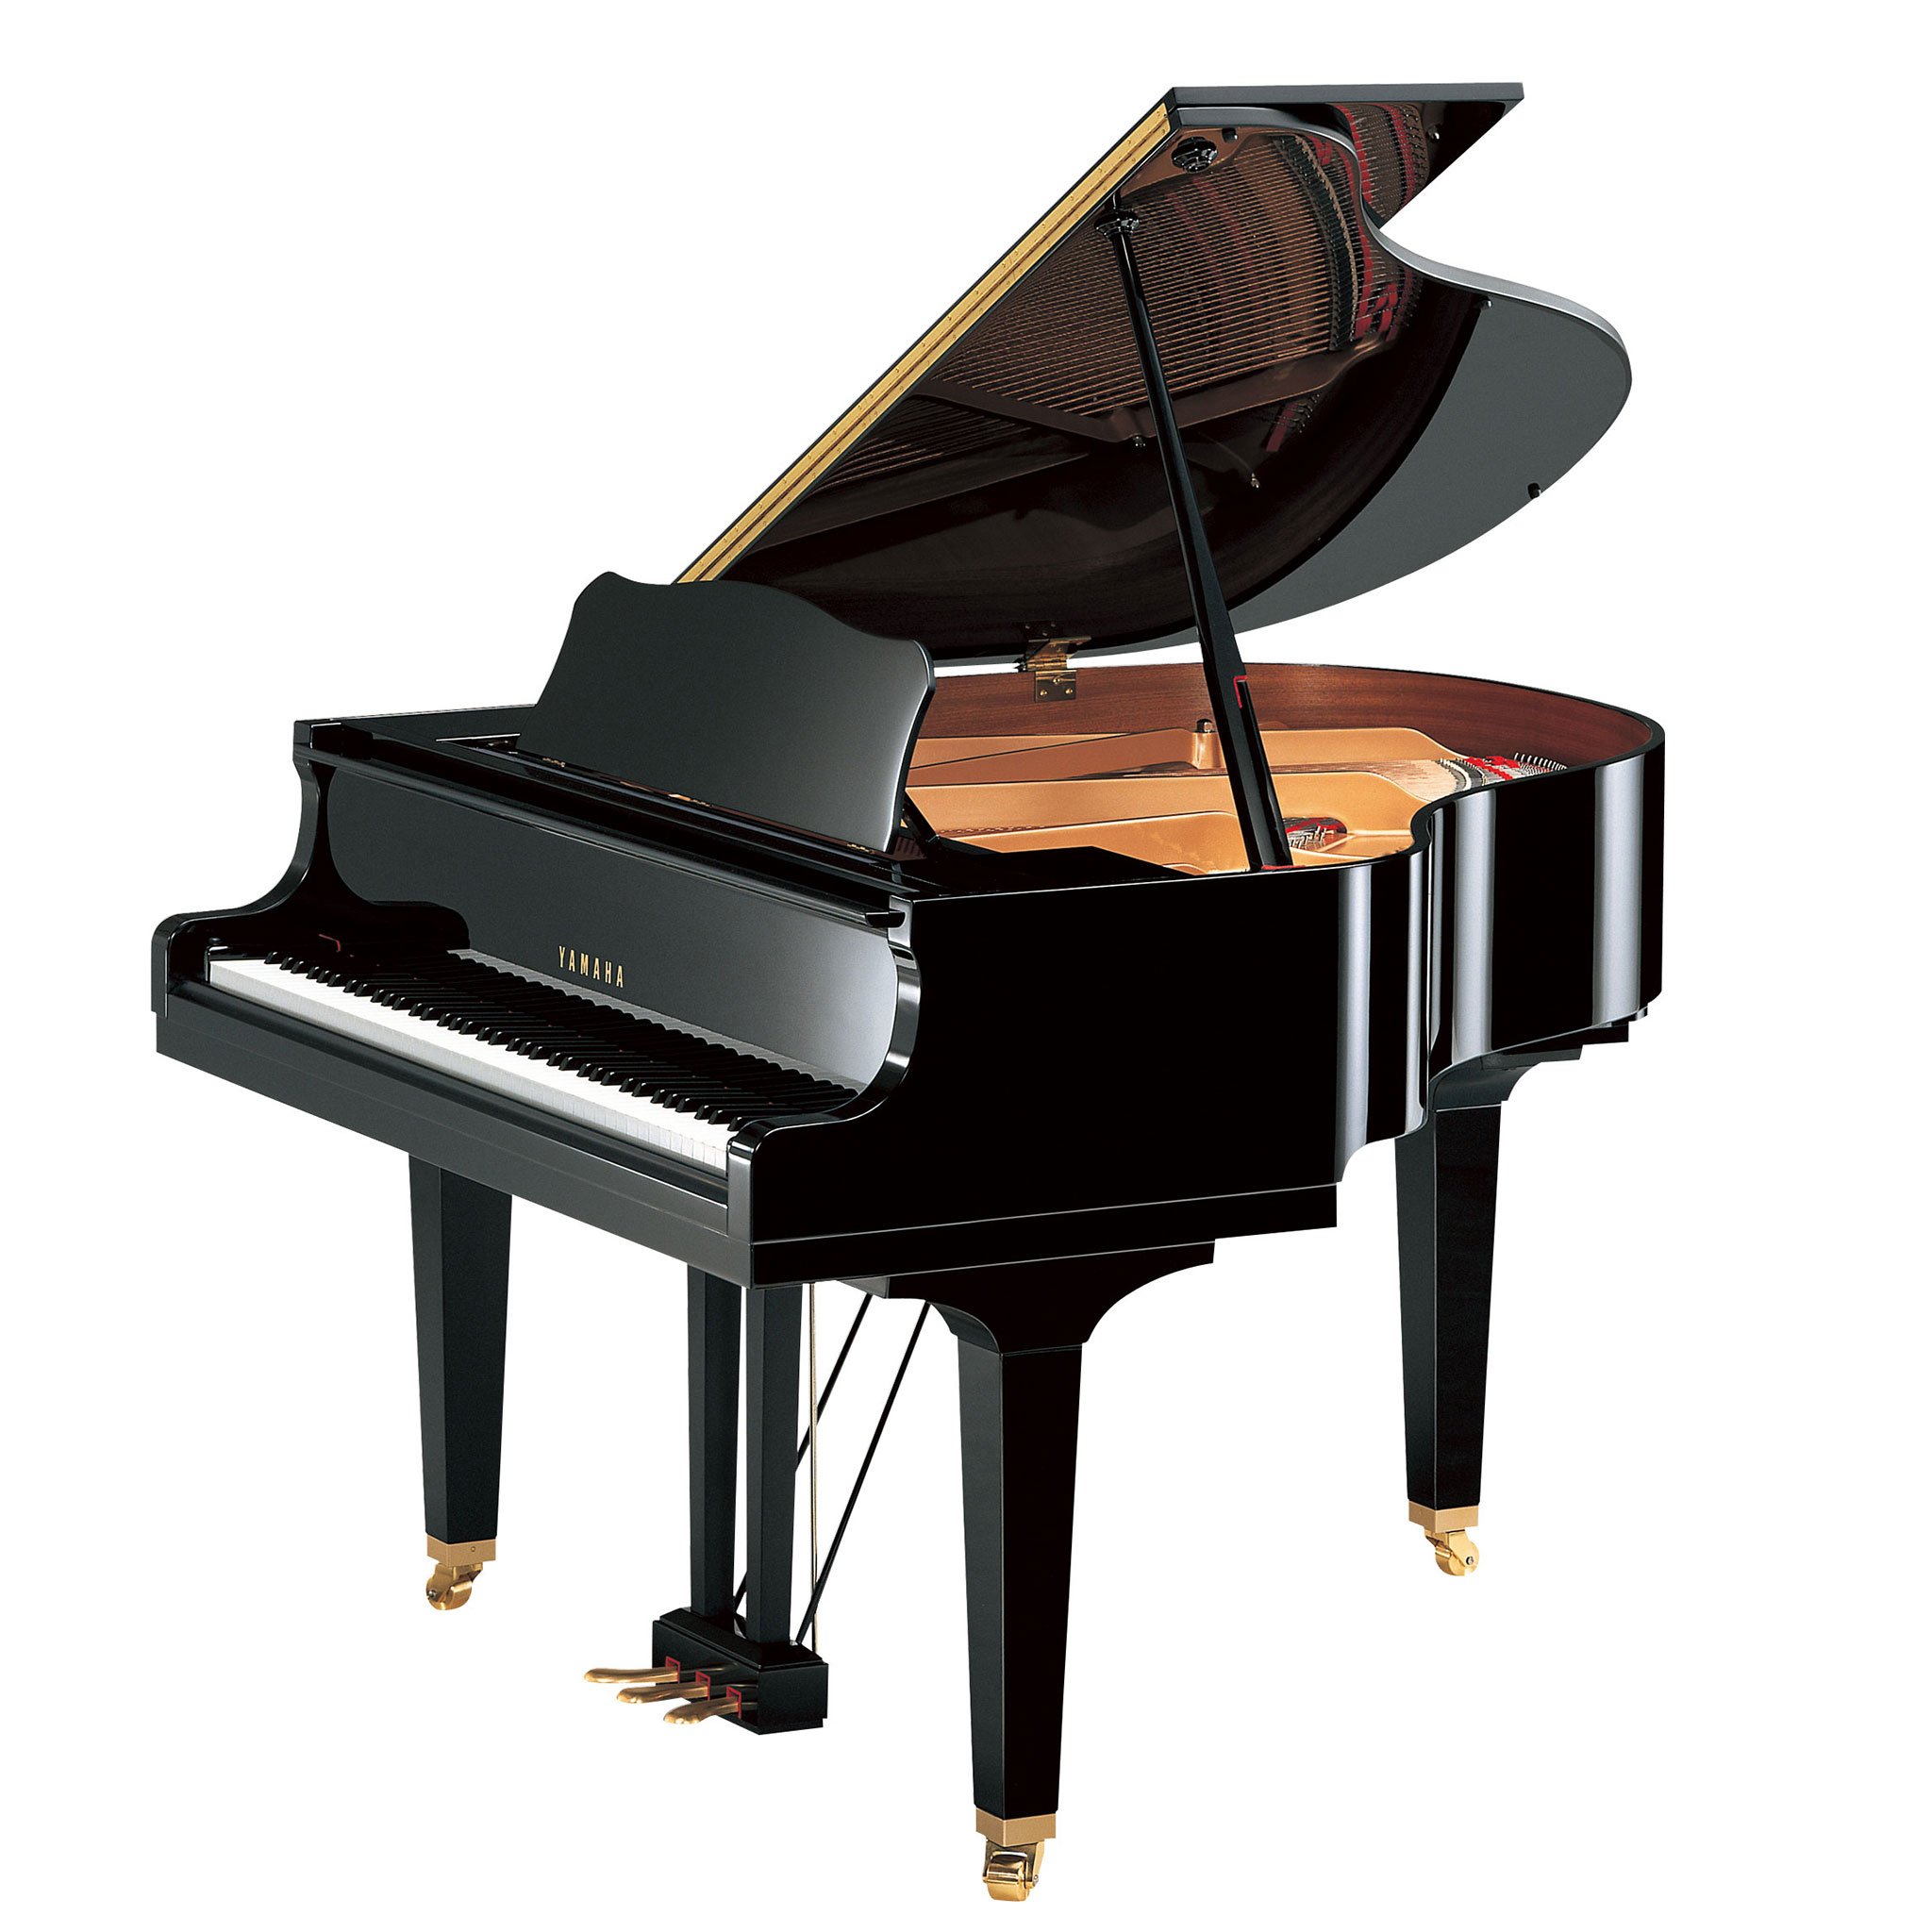 
Thinking of Buying a Used Yamaha Piano? Here's What You Need to Know About Prices